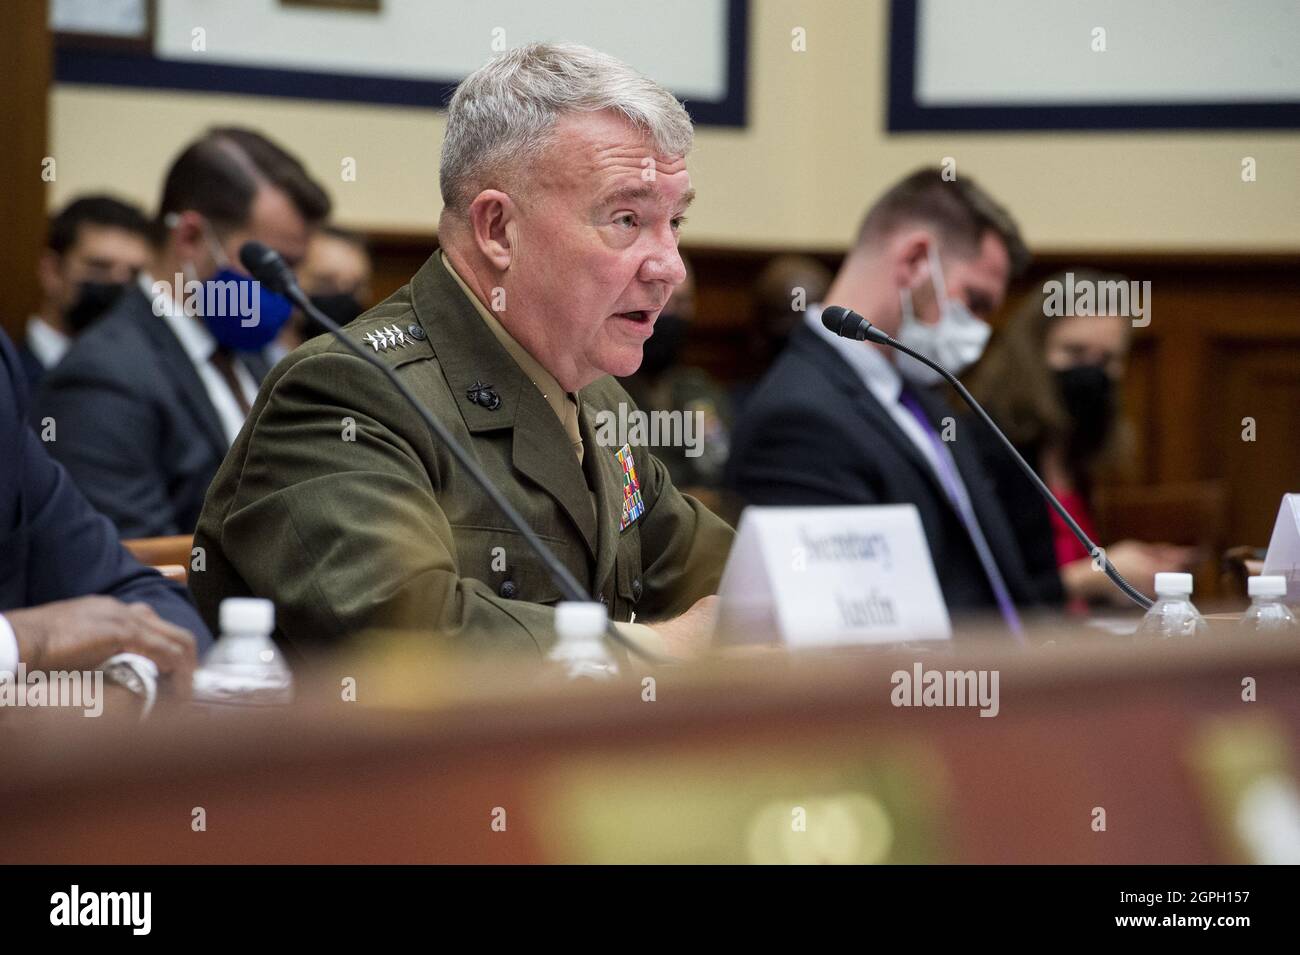 General Kenneth McKenzie Jr., USMC Commander, U.S. Central Command responds to questions during a House Armed Services Committee hearing on âÂ€ÂœEnding the U.S. Military Mission in AfghanistanâÂ€Â in the Rayburn House Office Building in Washington, DC, Wednesday, September 29, 2021. Photo by Rod Lamkey / Pool/ABACAPRESS.COM Stock Photo